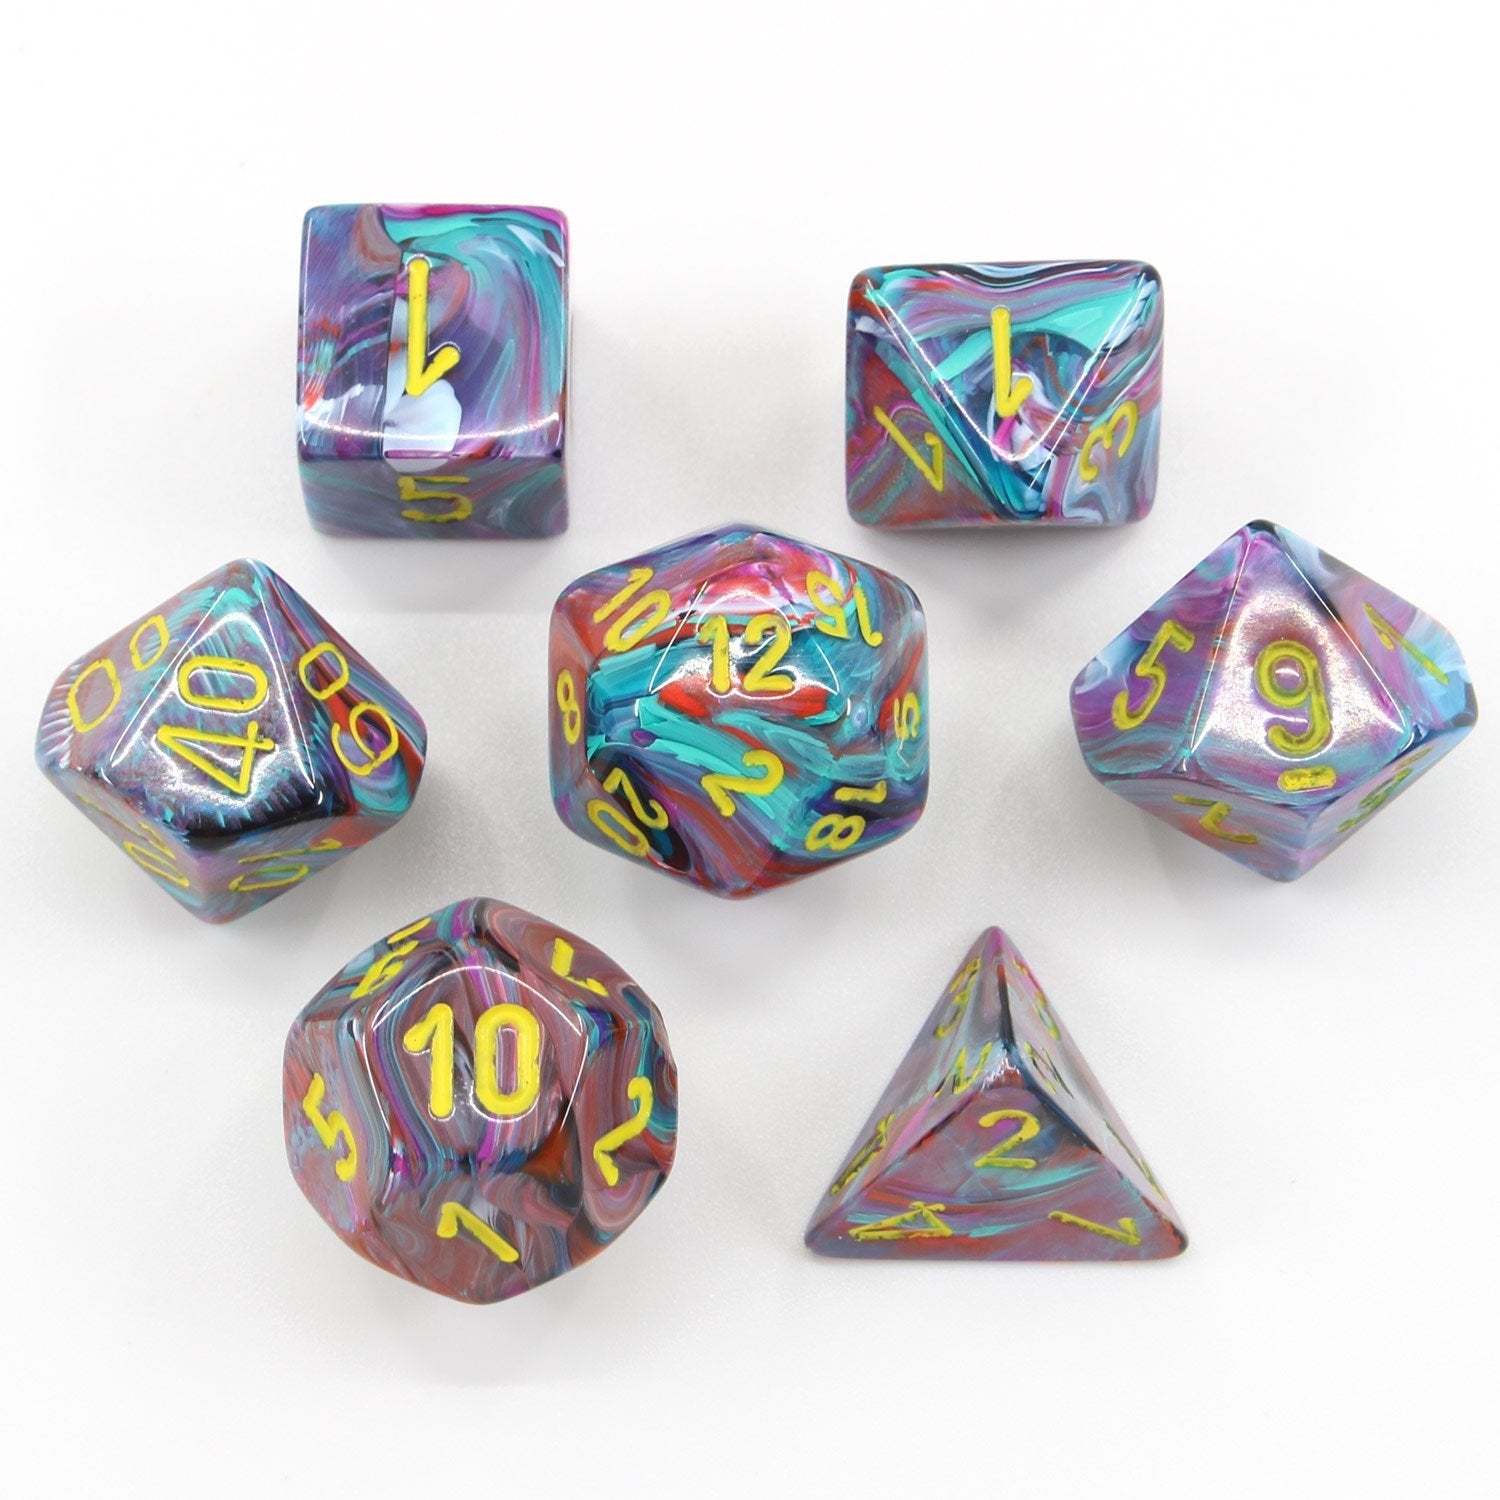 Chessex Dice: 7 Die Set - Festive - Mosaic with Yellow (CHX 27450) - Gamescape